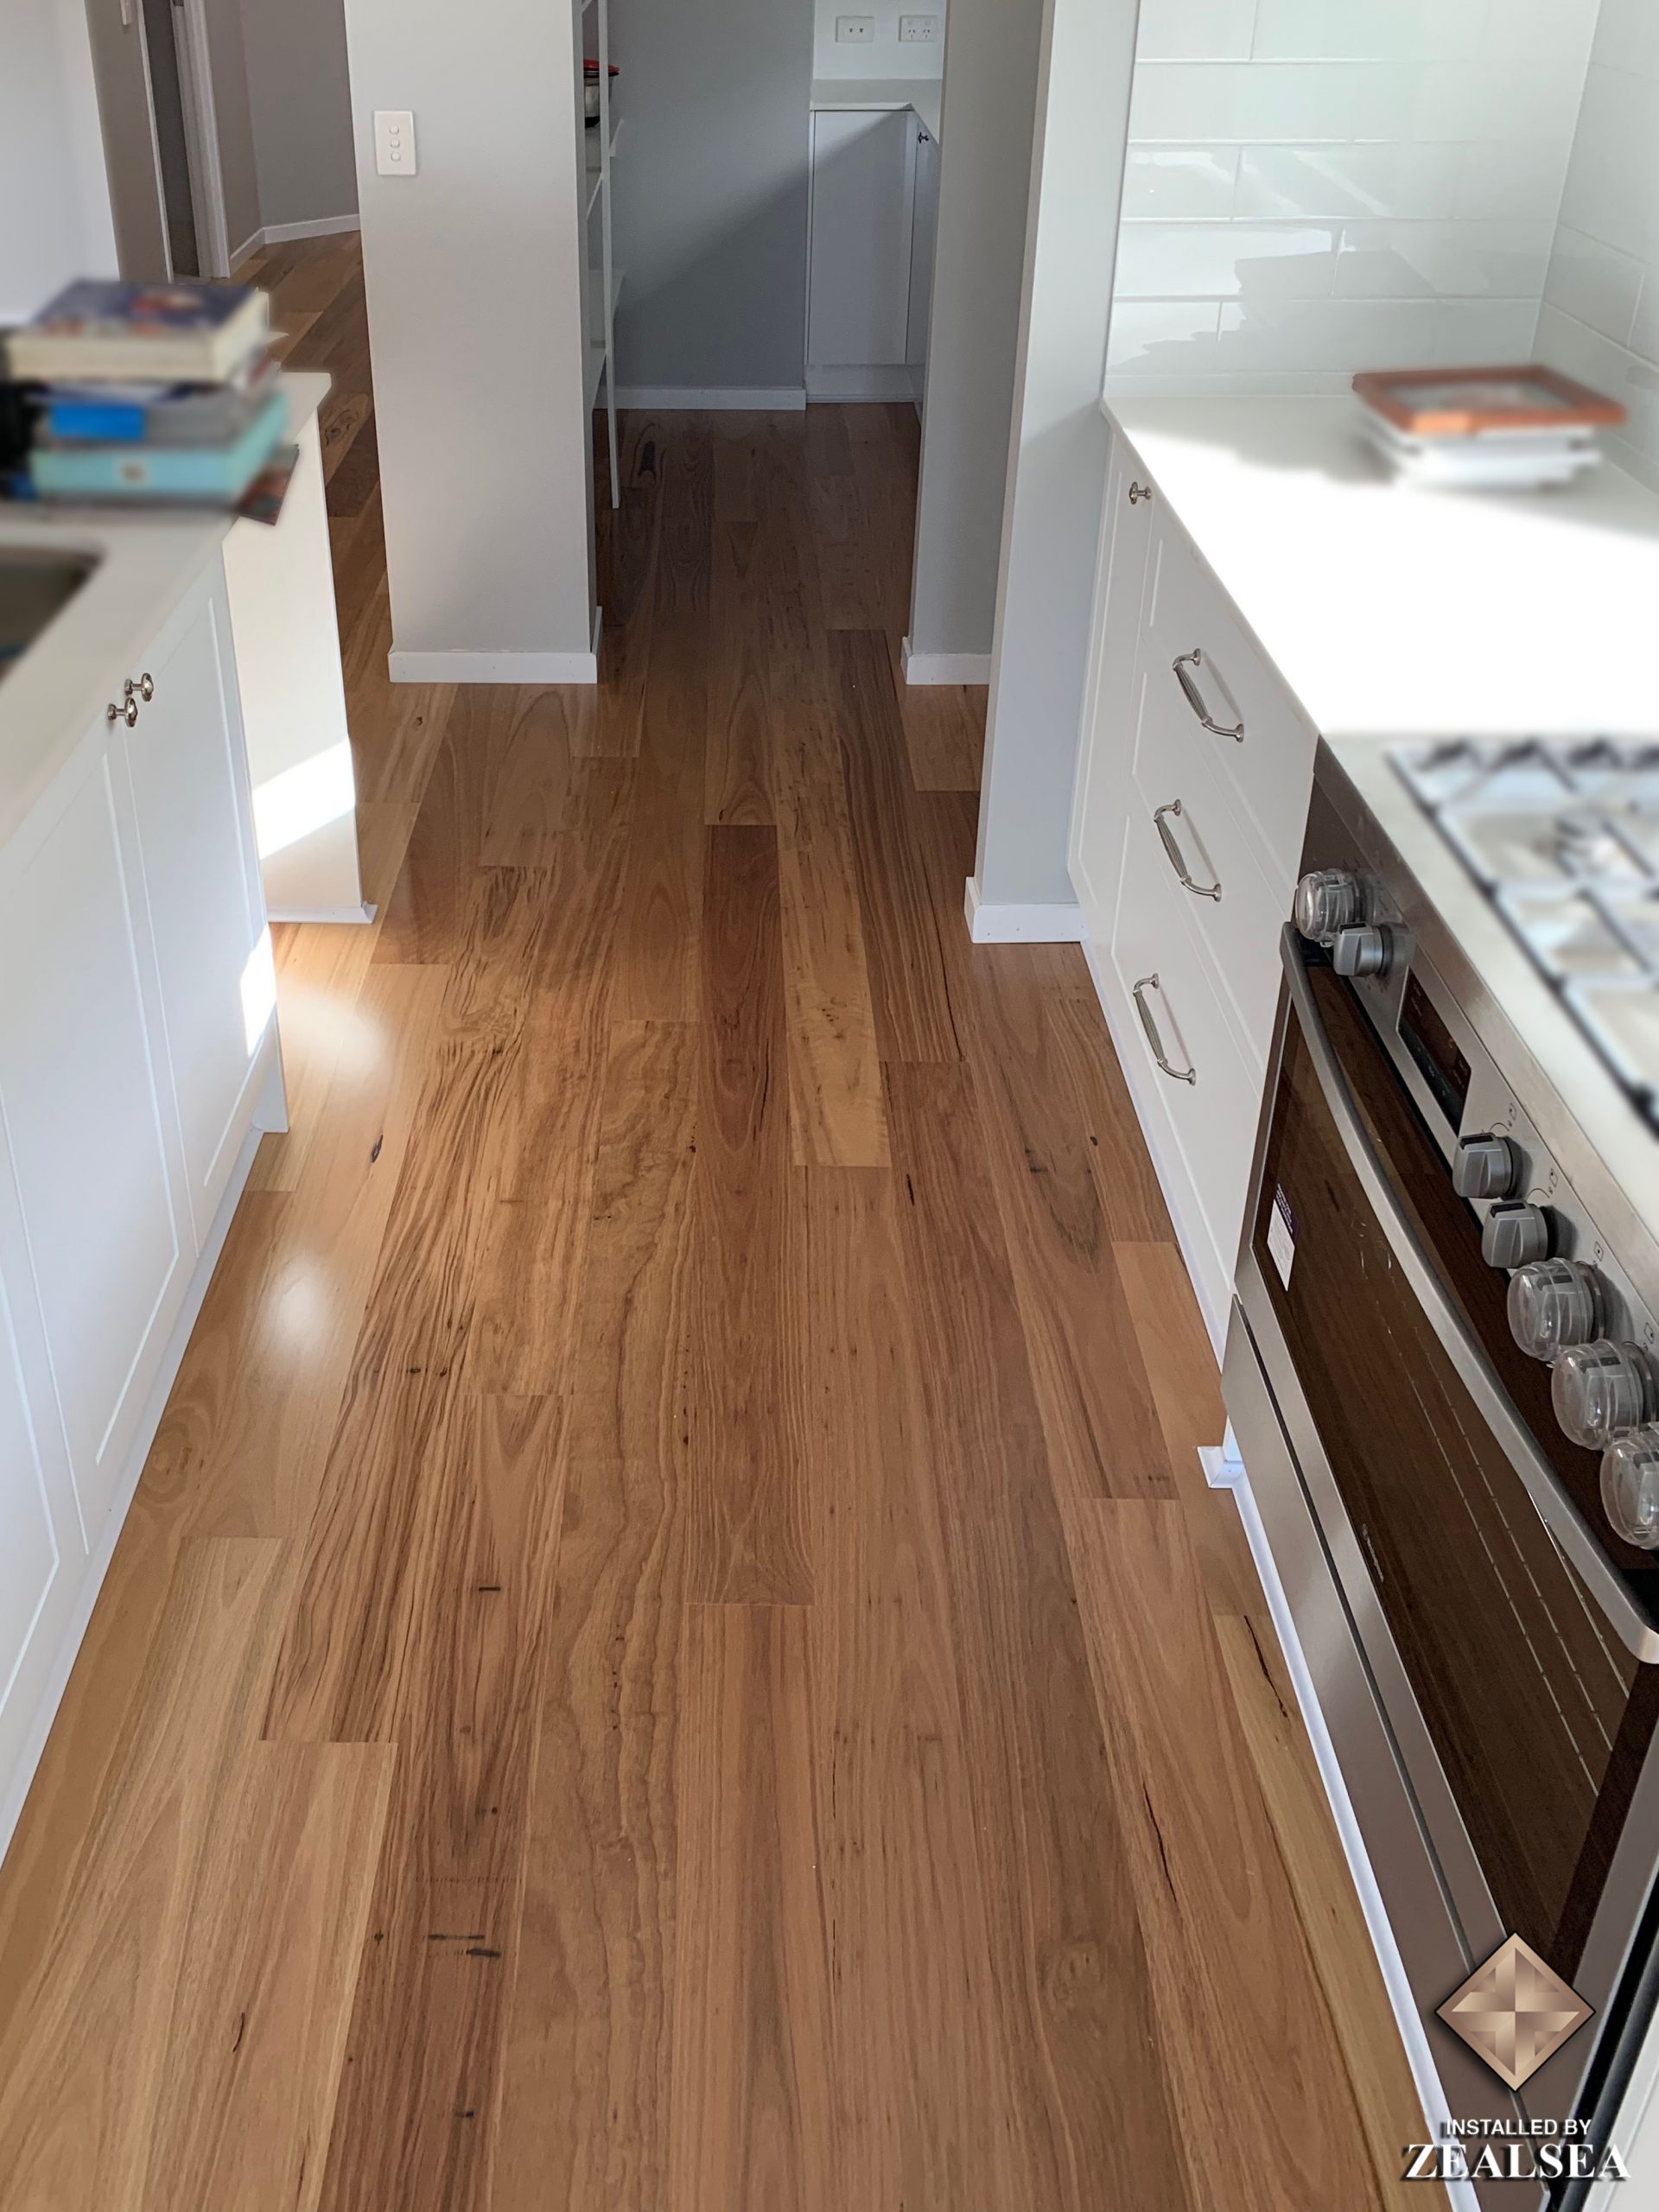 zealsea timber flooring professional installation oxley boral blackbutt 5 scaled